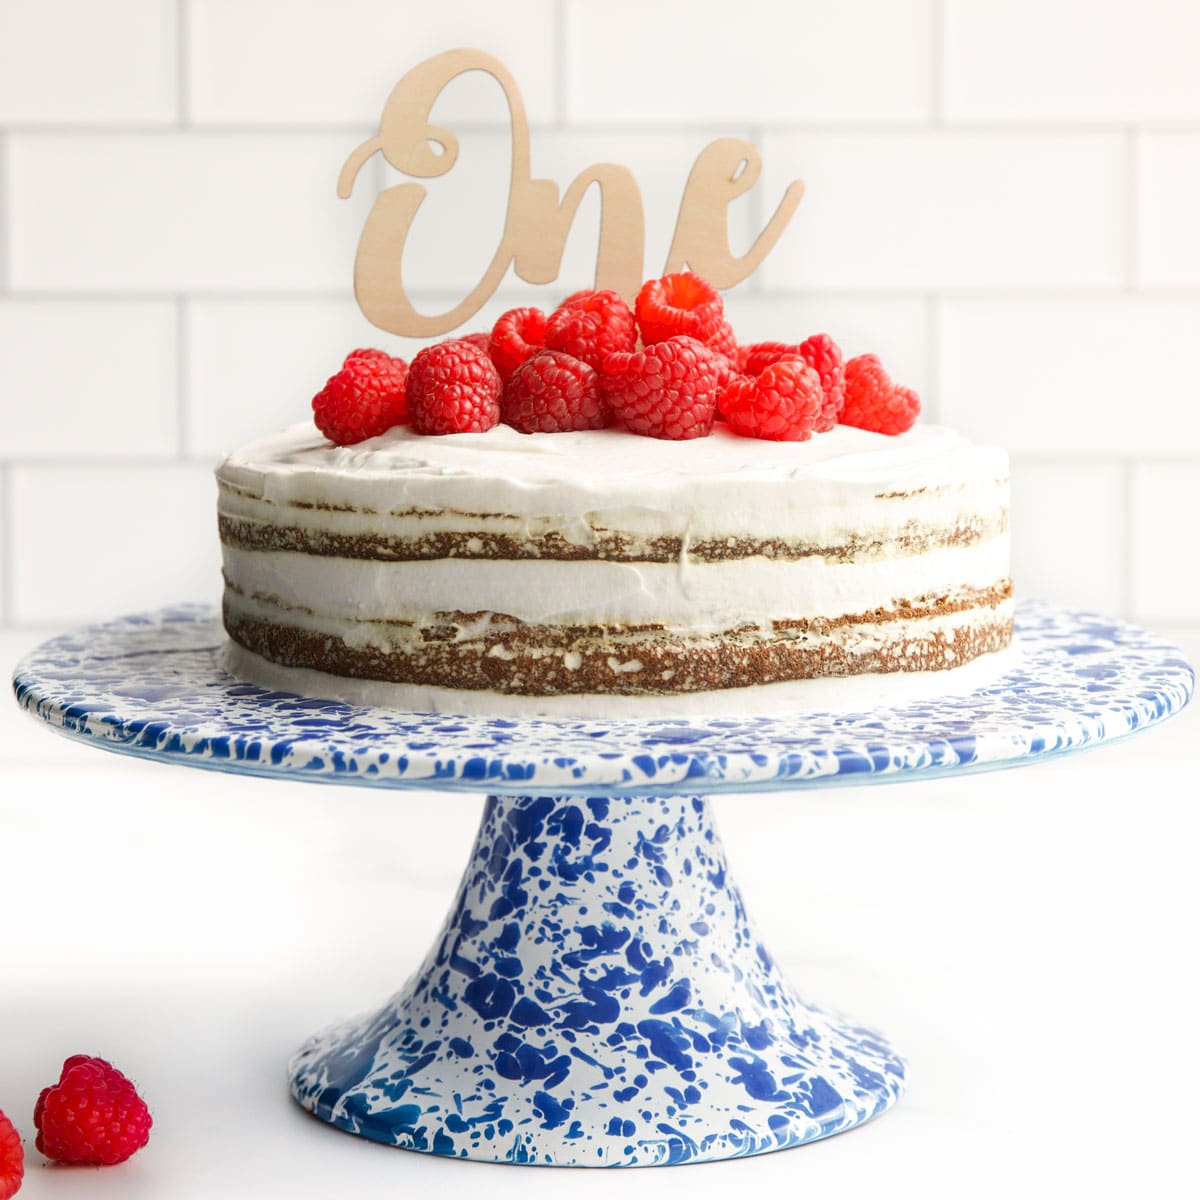 33 Bridal Shower Cakes That Your ToBeWed Will Swoon Over